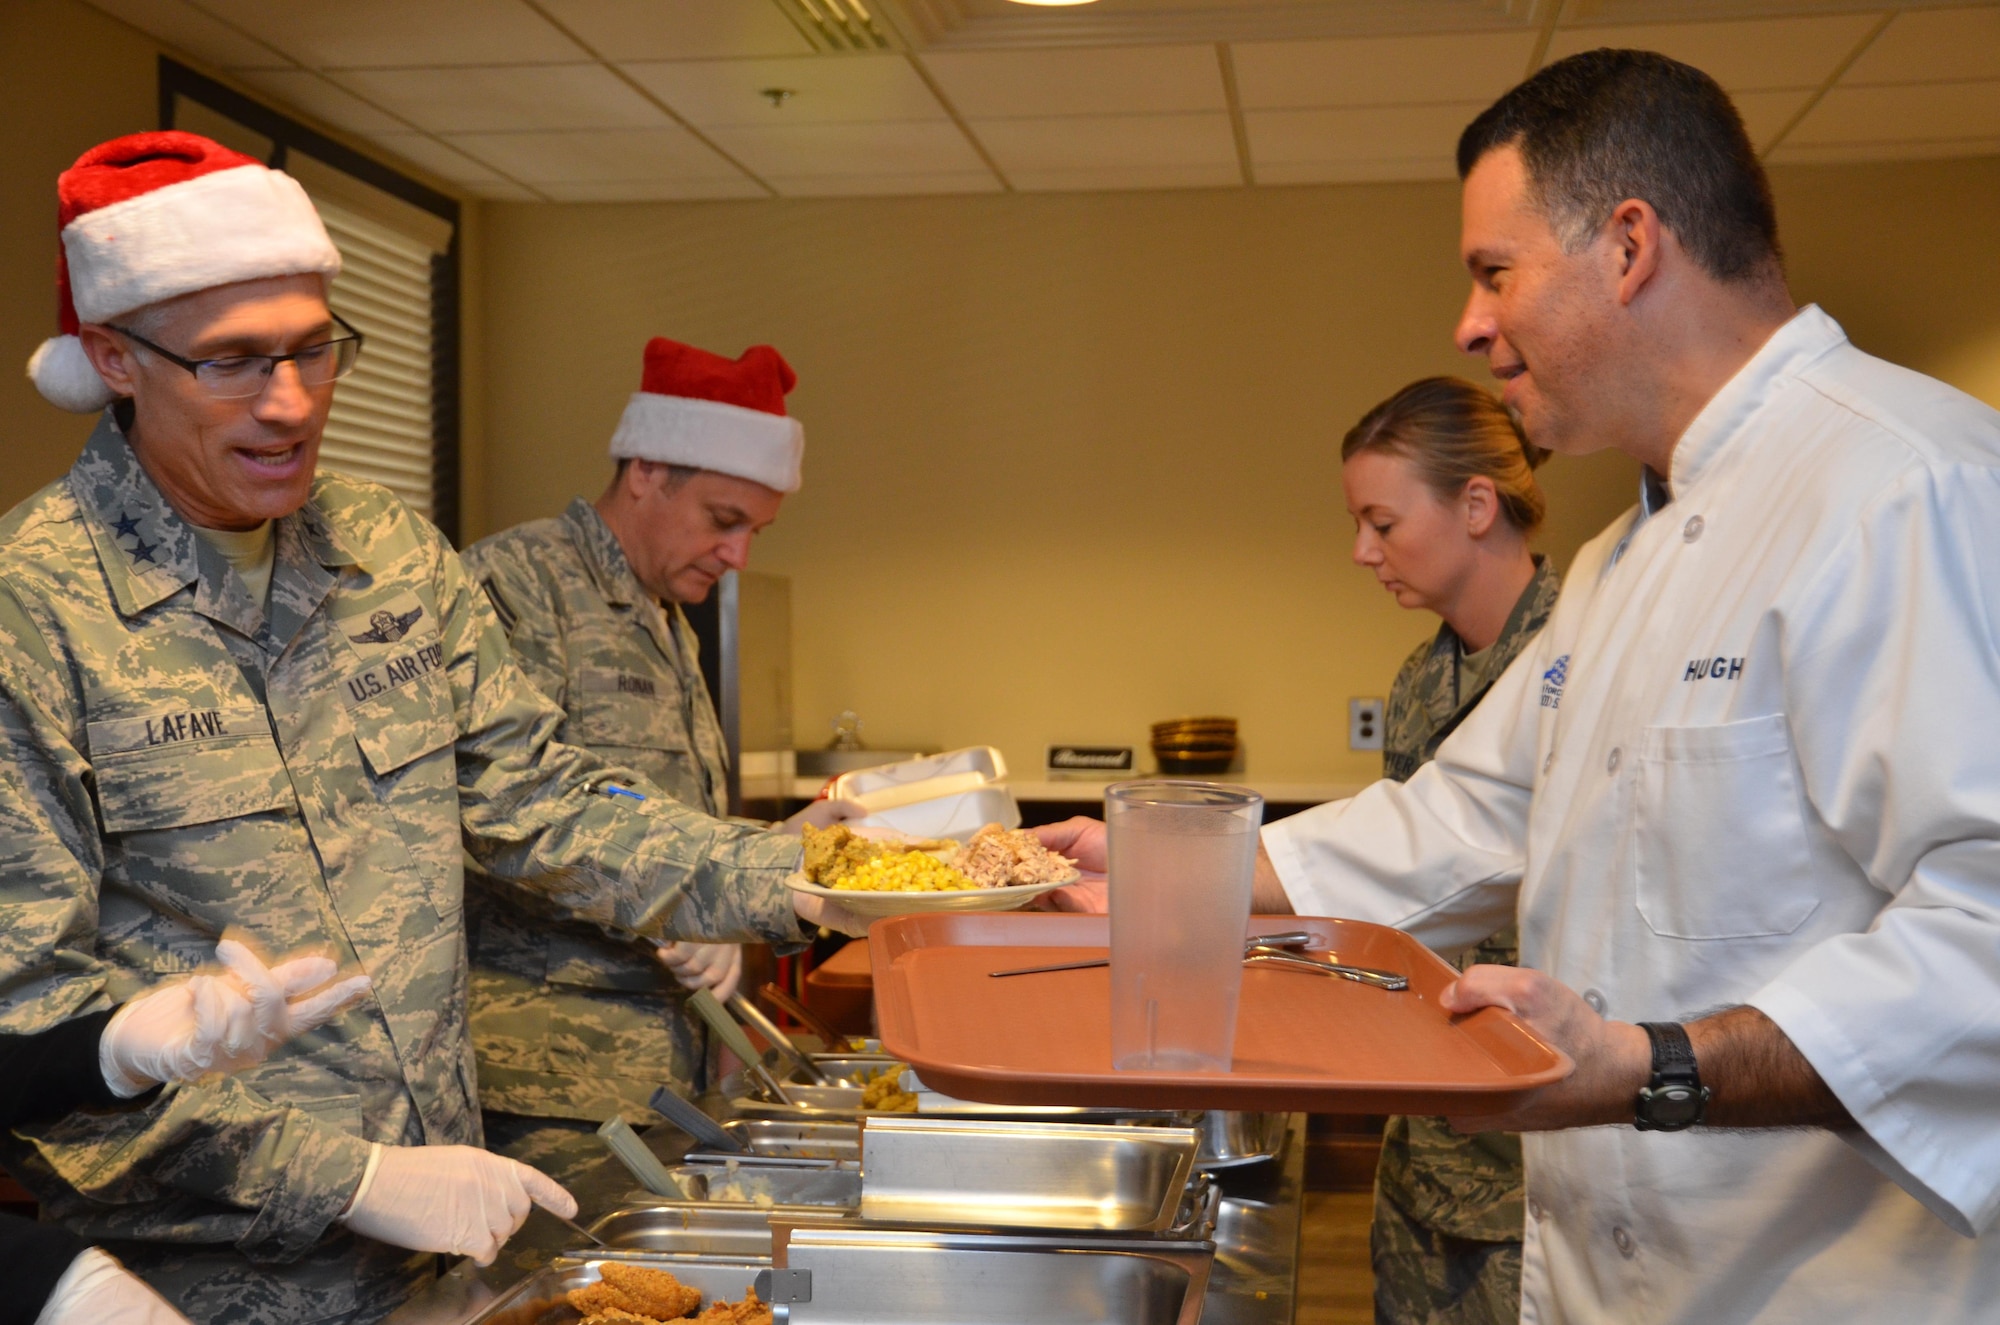 Maj. Gen. Craig La Fave, 22nd Air Force commander, serves holiday meals to Airmen during lunch at Dobbins Air Reserve Base, Georgia Dec. 2, 2017. Afterward, the general sat down for a holiday meal with a group of Airmen. (U.S. Air Force photo by Senior Airman Lauren Douglas)